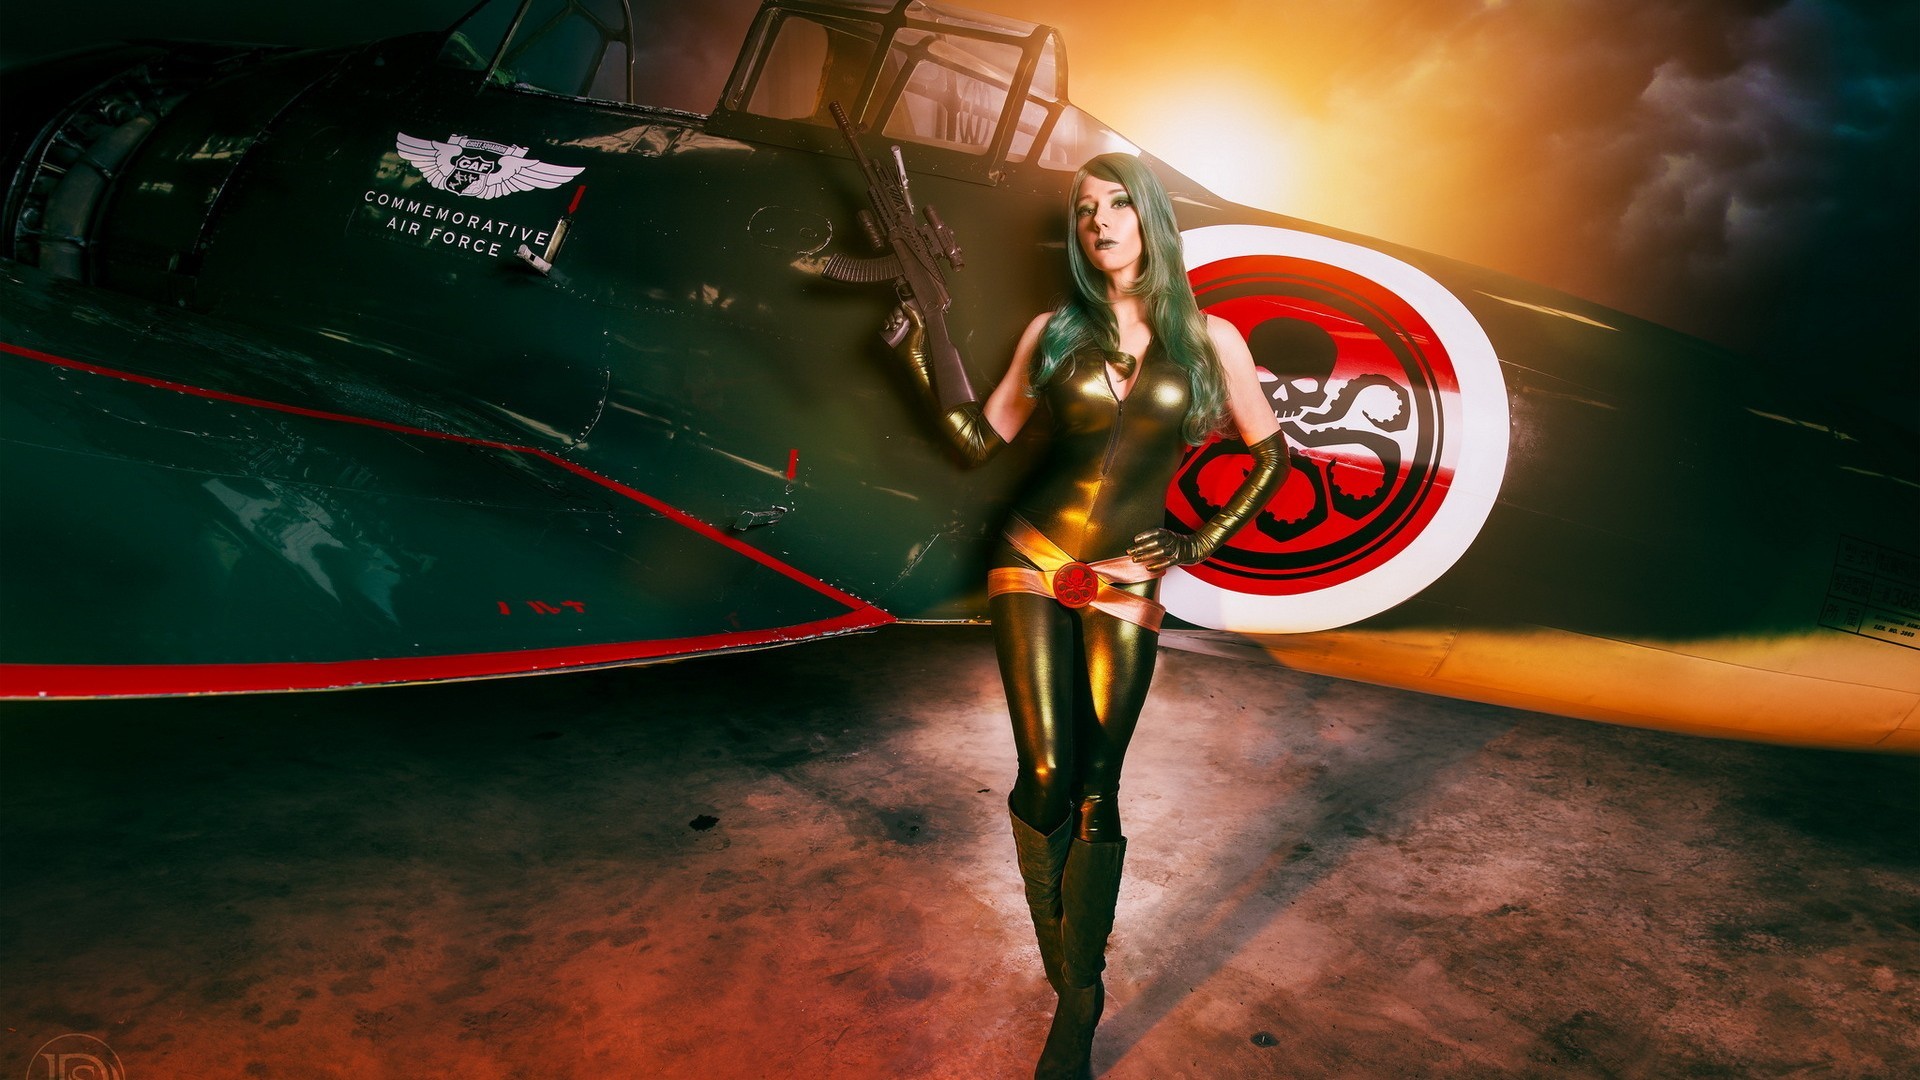 People 1920x1080 women cosplay model gun airplane tight clothing Hydra (comics) girls with guns aircraft military aircraft military vehicle vehicle military green hair weapon latex hands on hips